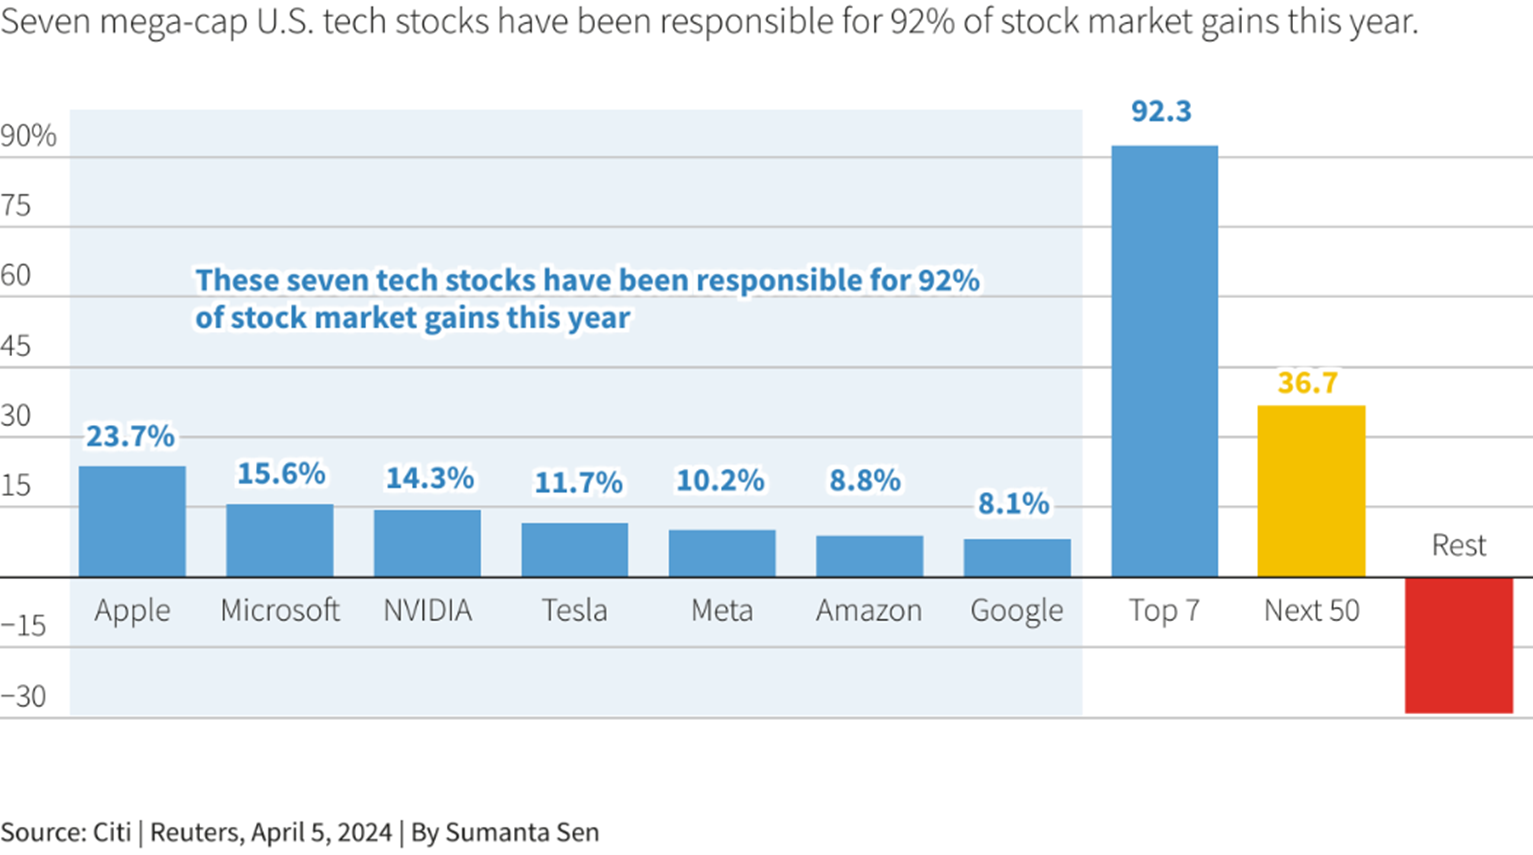 Tech Concentration - Just seven stocks have been responsible for 92% of equity market gains this year
